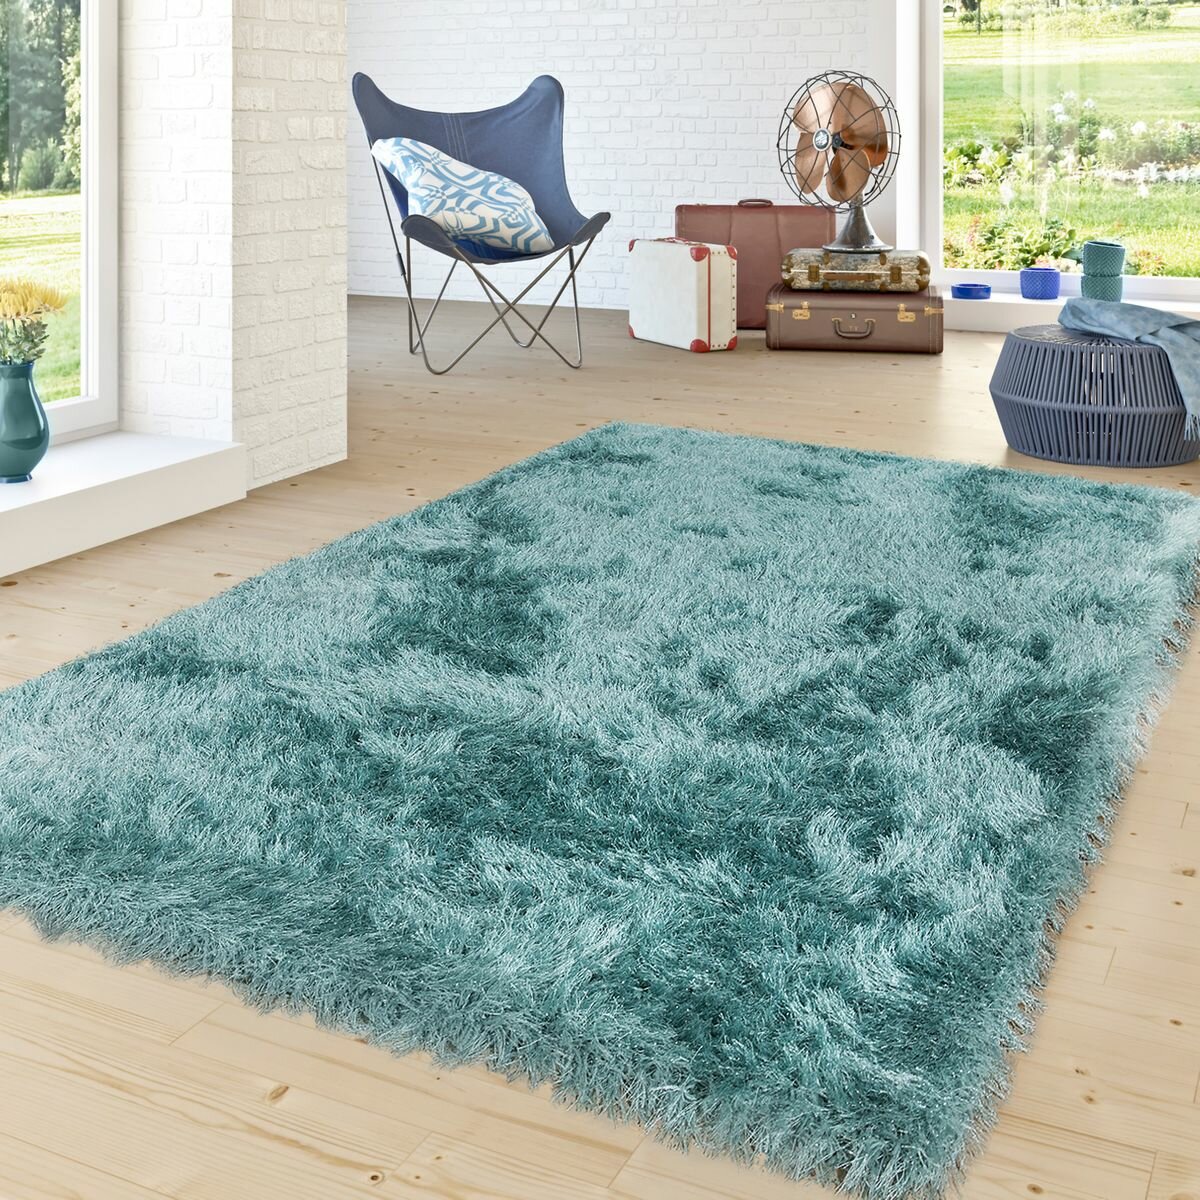 Turquoise Brown Moroccan Modern Soft Shag Shaggy Living Room Bedroom Area Rug